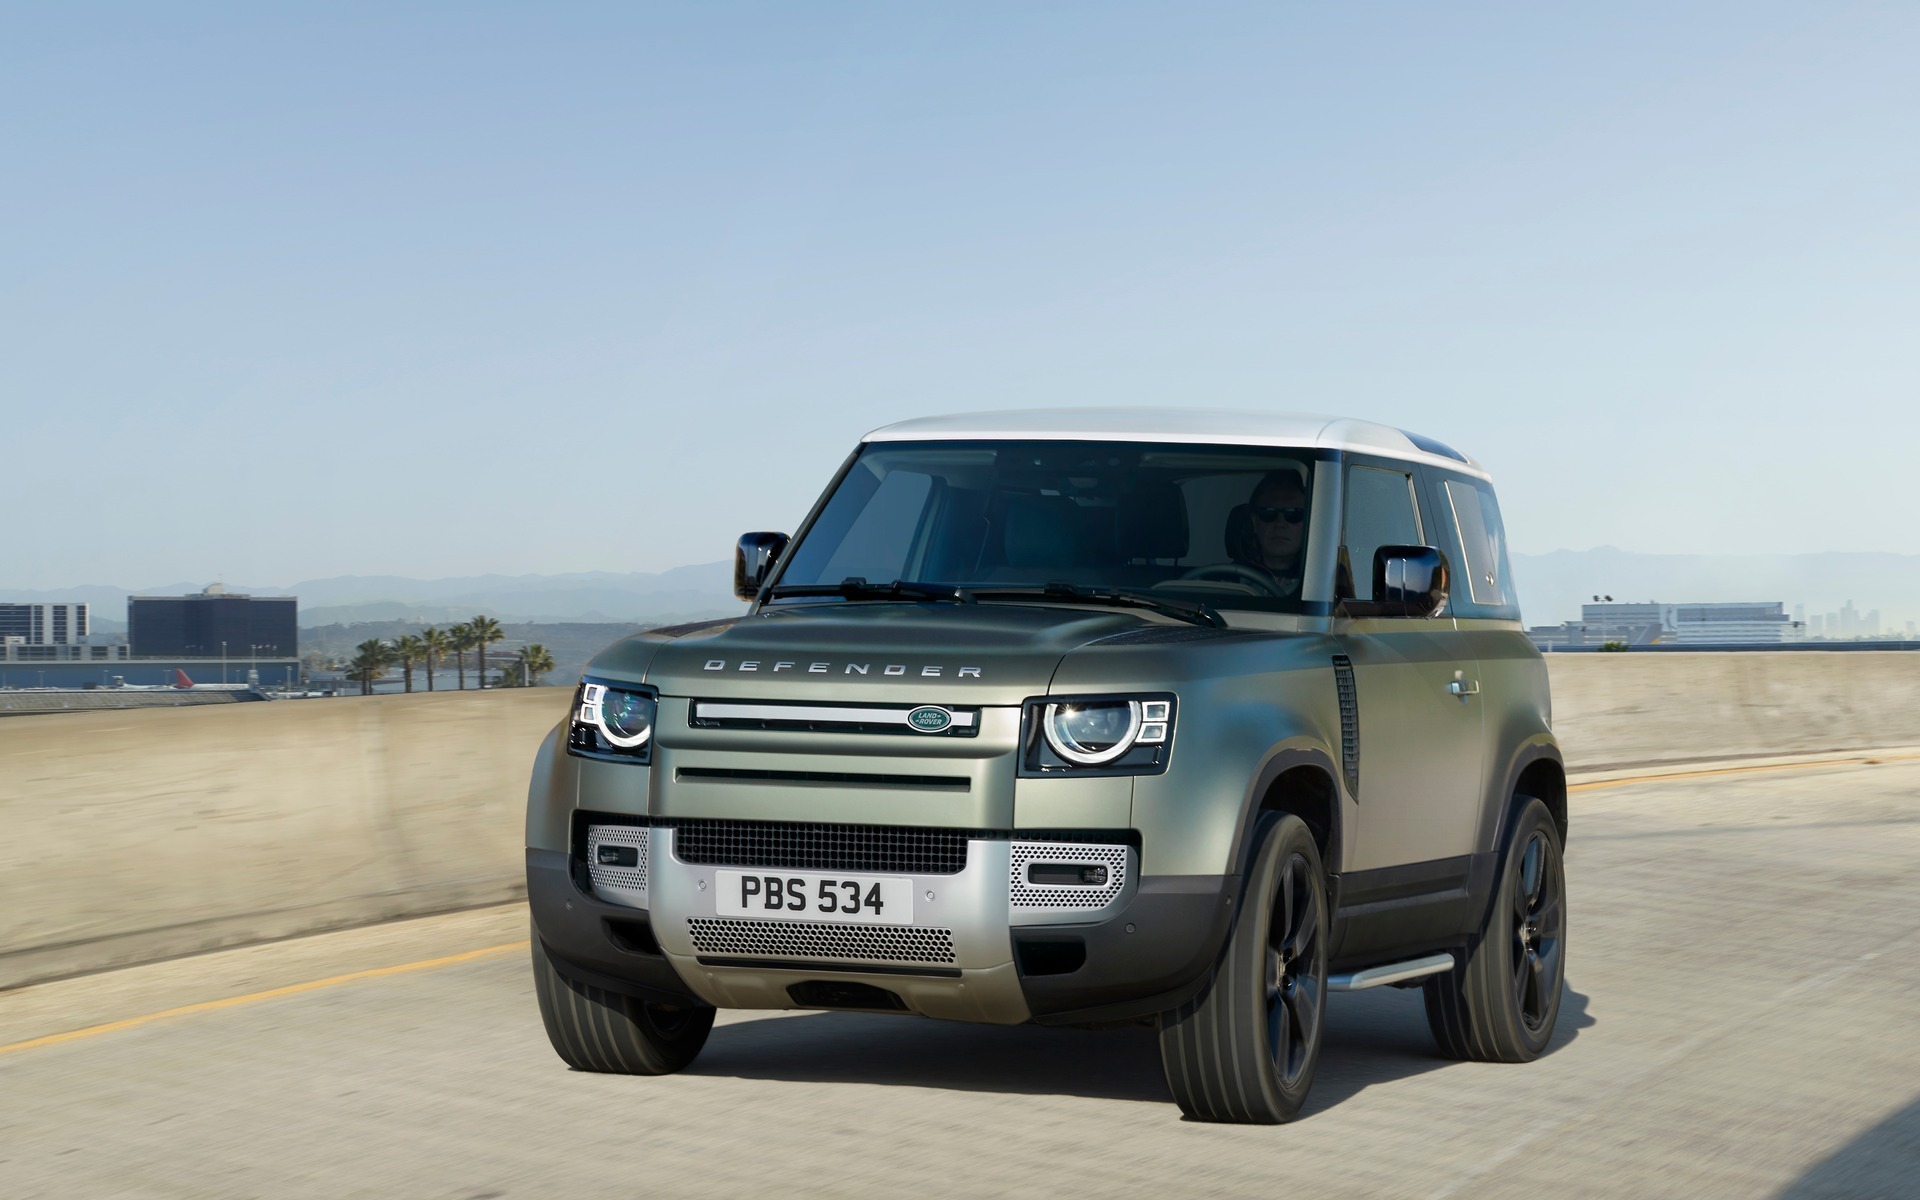 Range Rover 2020 Defender Price  - Research, Compare And Save Listings, Or Contact Sellers Directly From 1324 2020 Defender Models Nationwide.